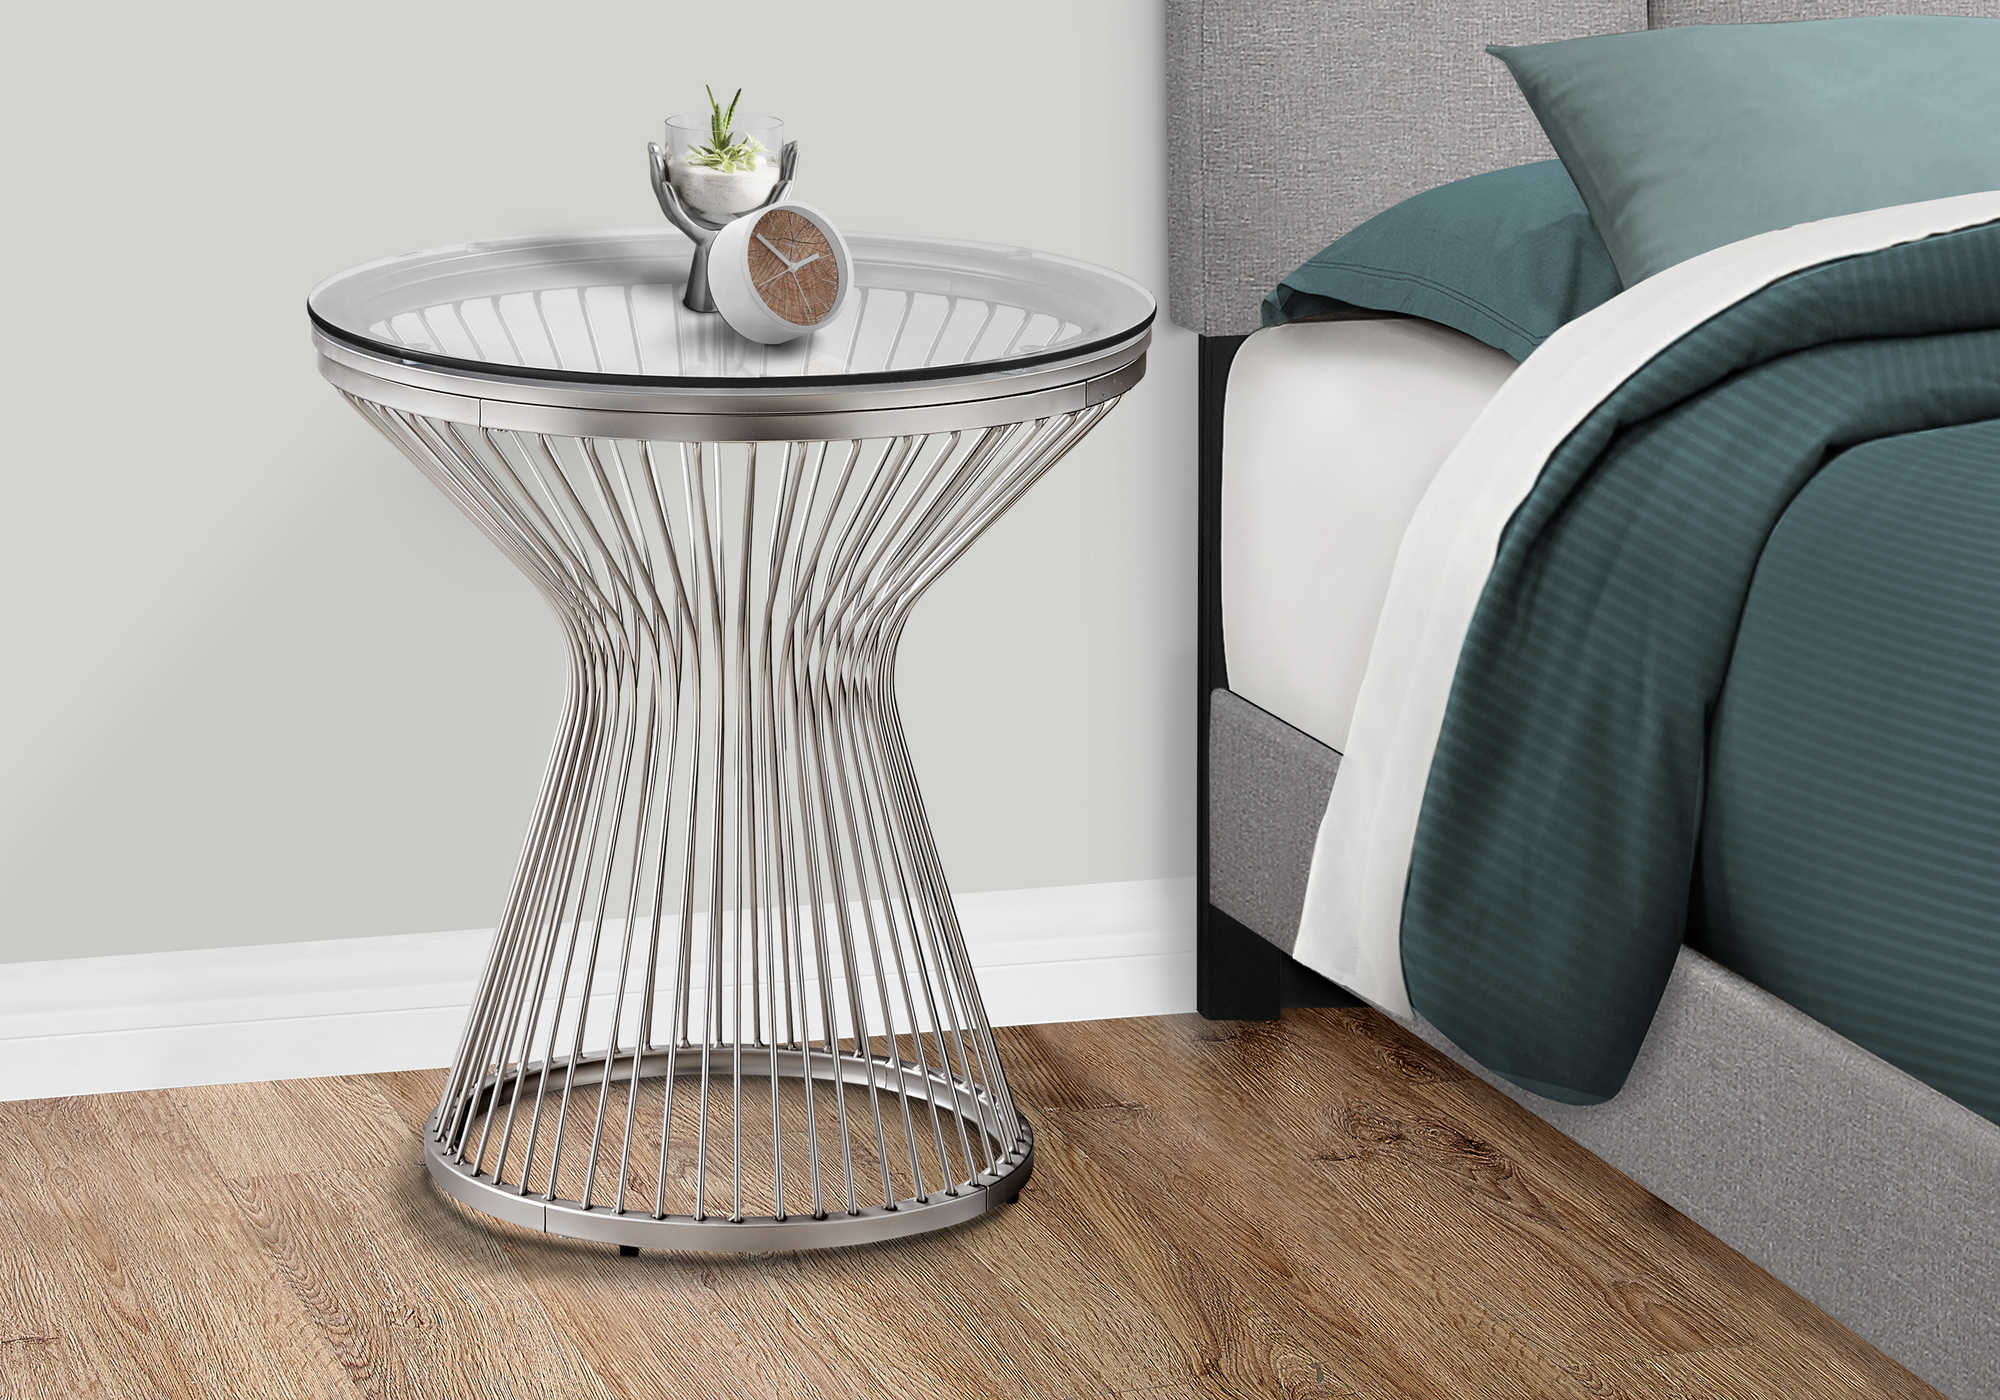 NIGHTSTAND - 24"H / STAINLESS STEEL WITH TEMPERED GLASS